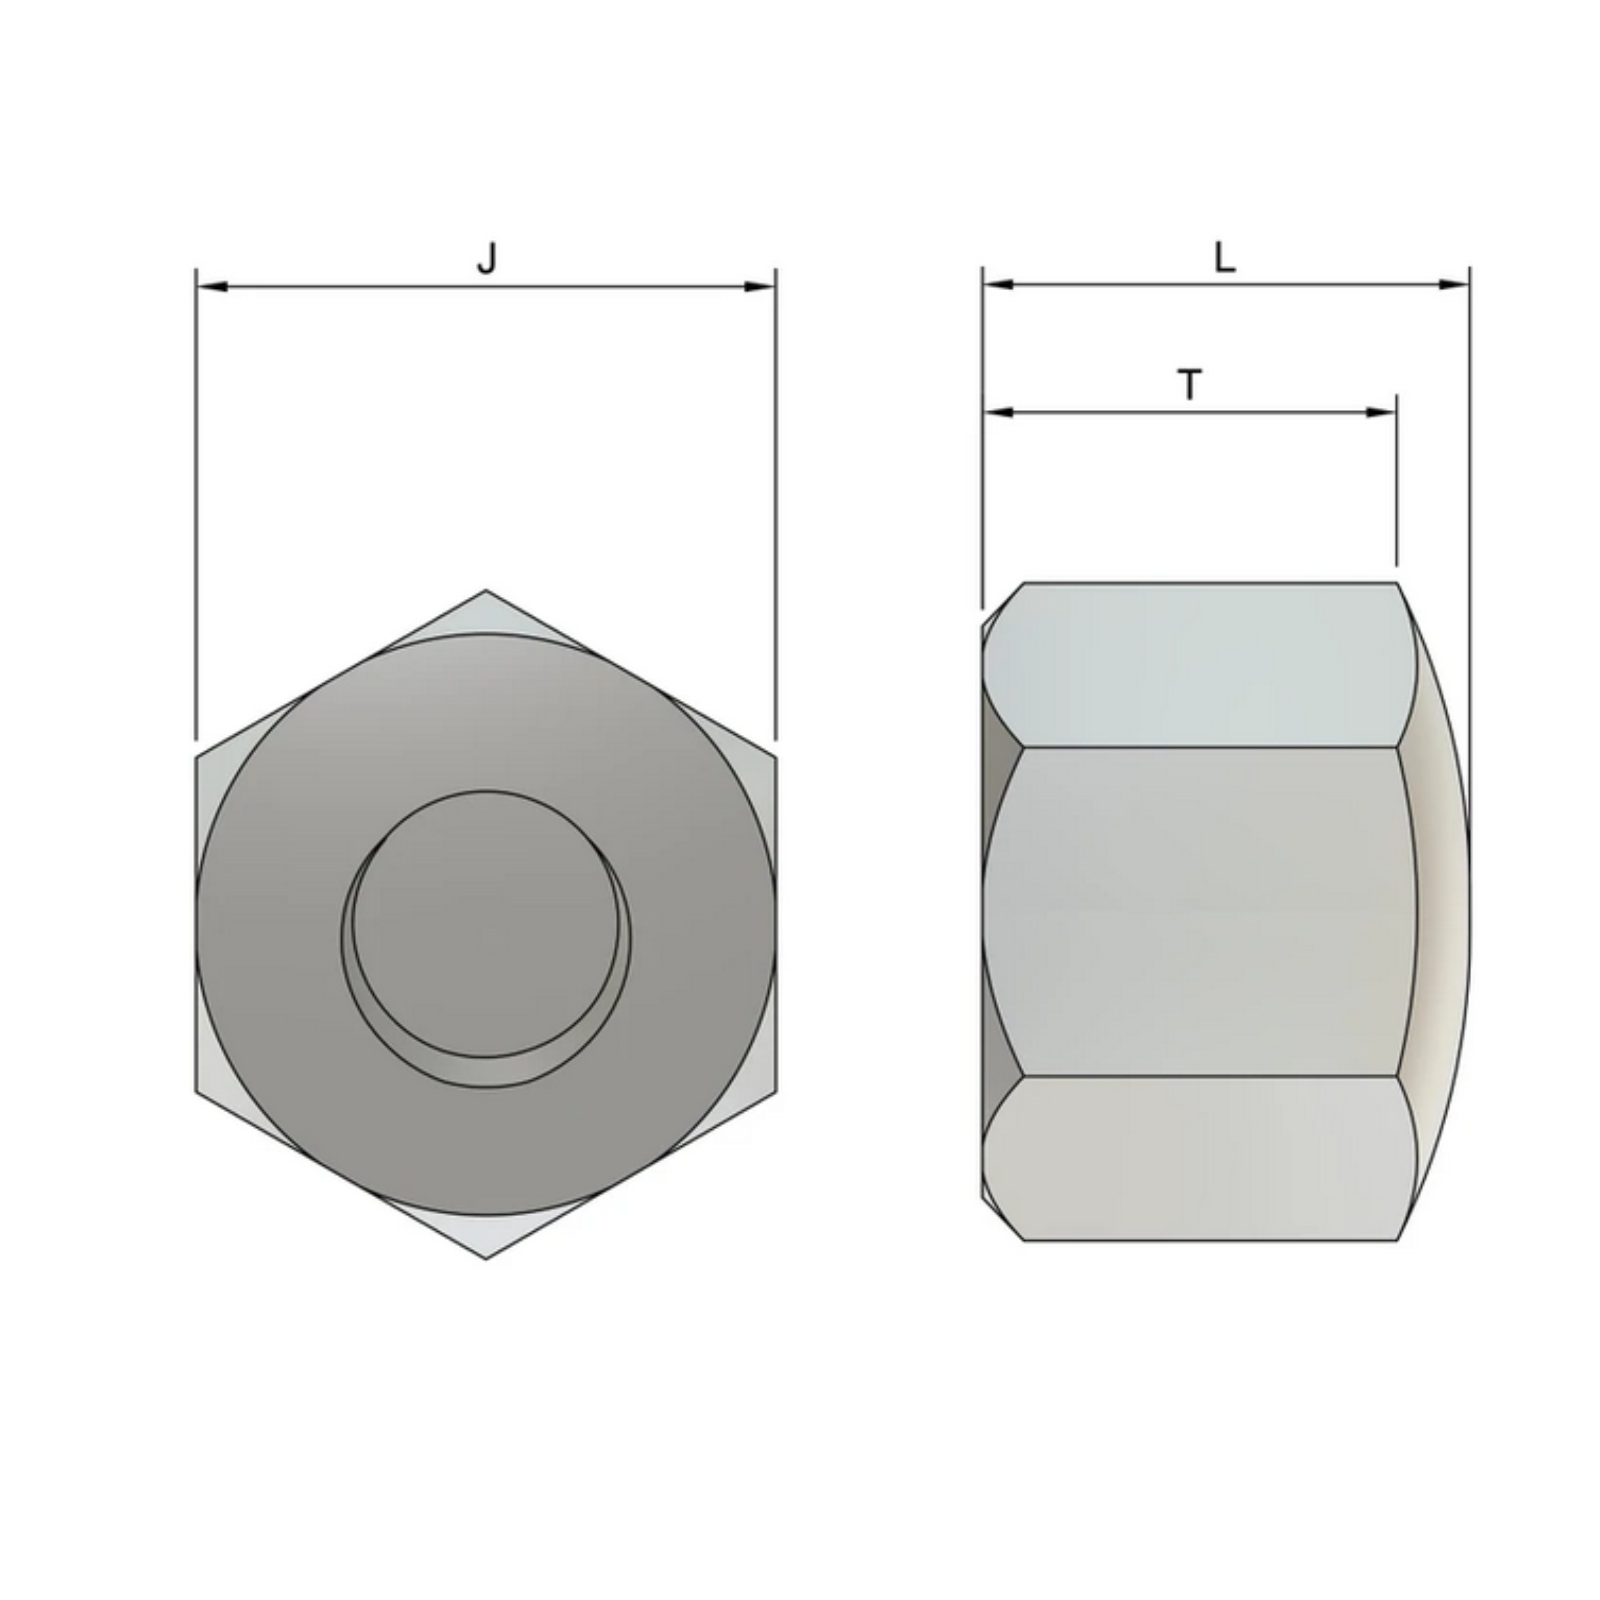 M3 Cap Nuts (DIN 917) - Stainless Steel (A2)